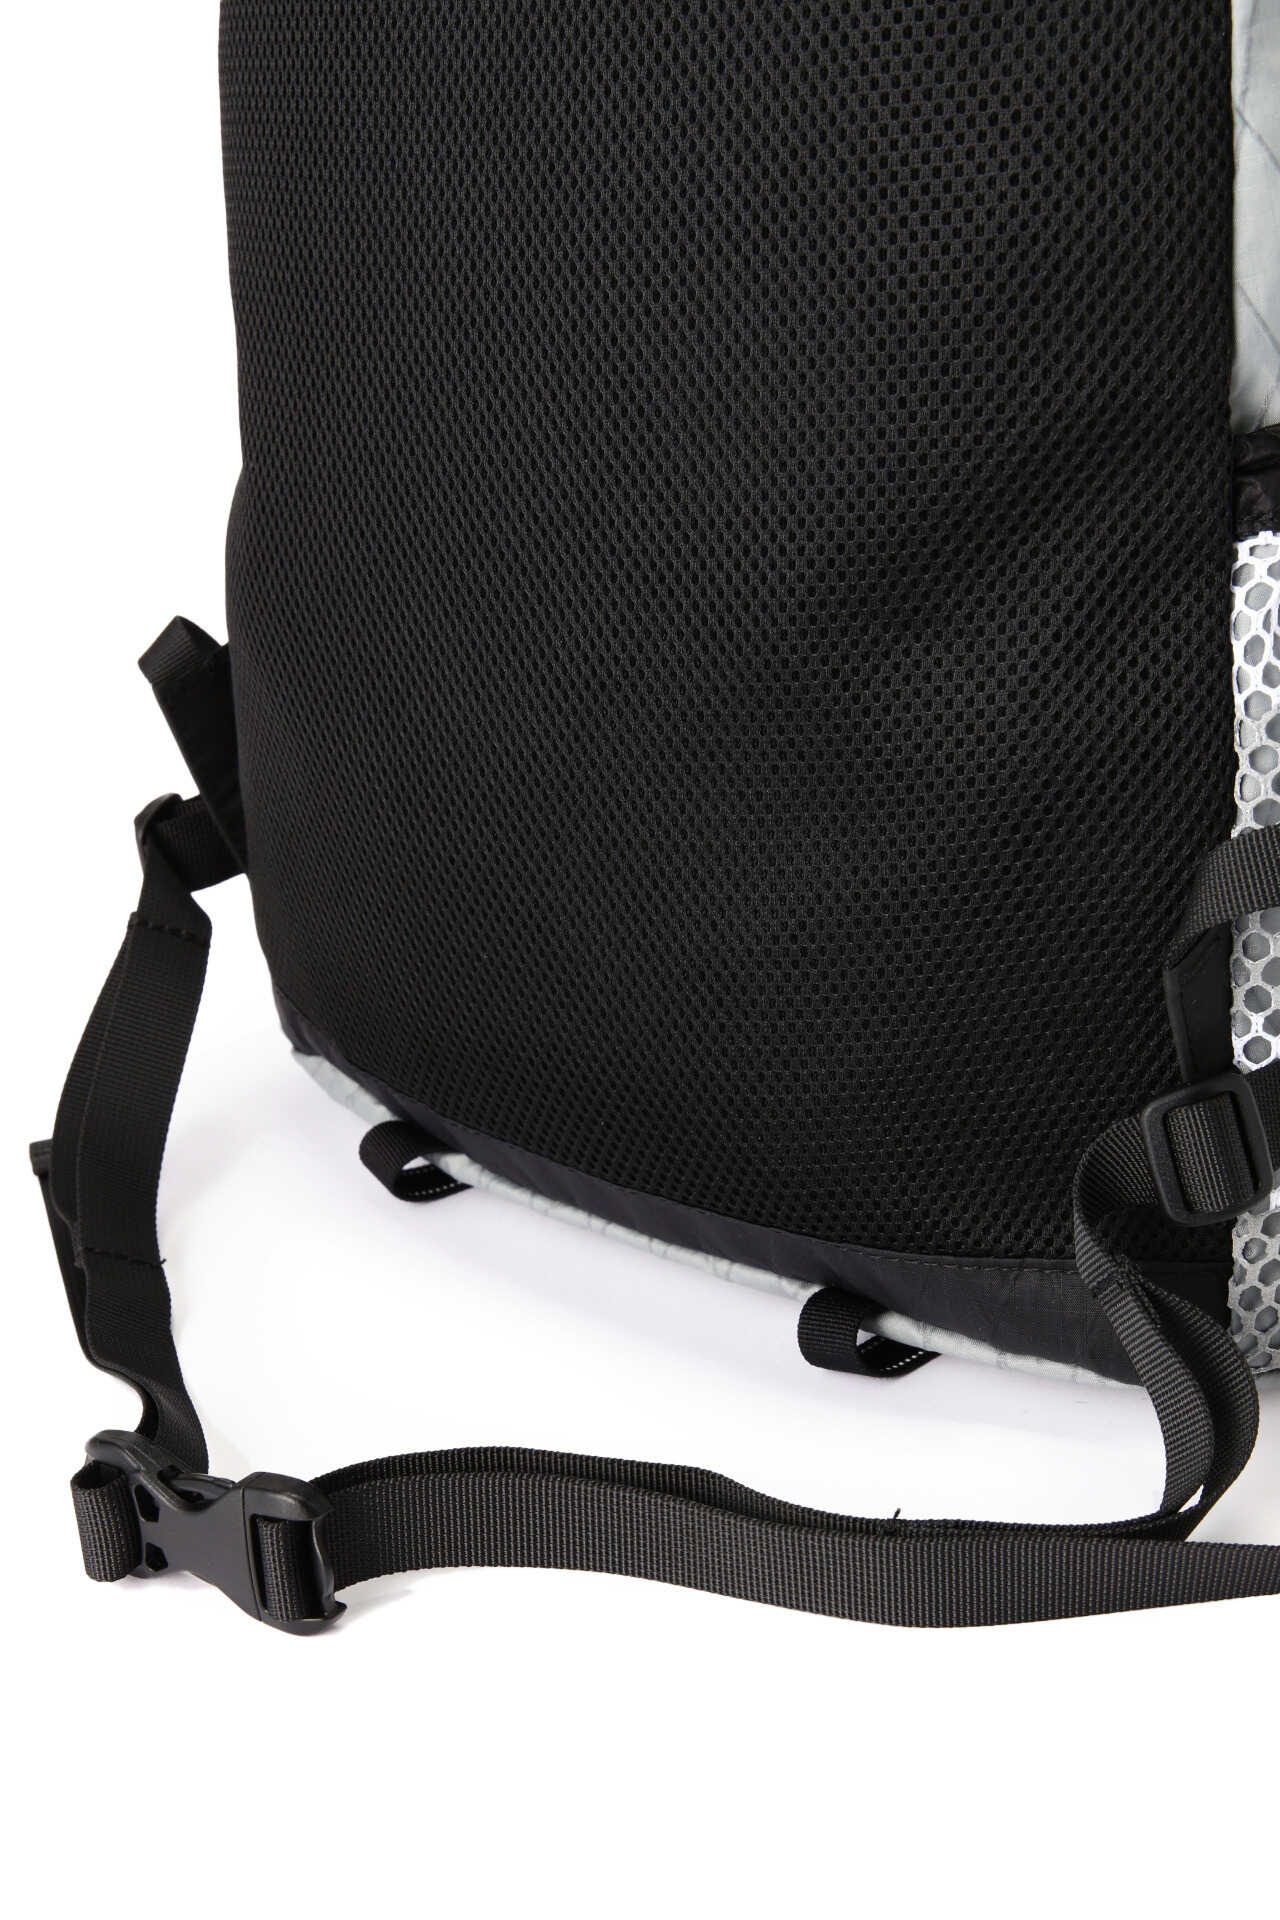 Partly Cloudy X-Pac 20L Packable Daypack